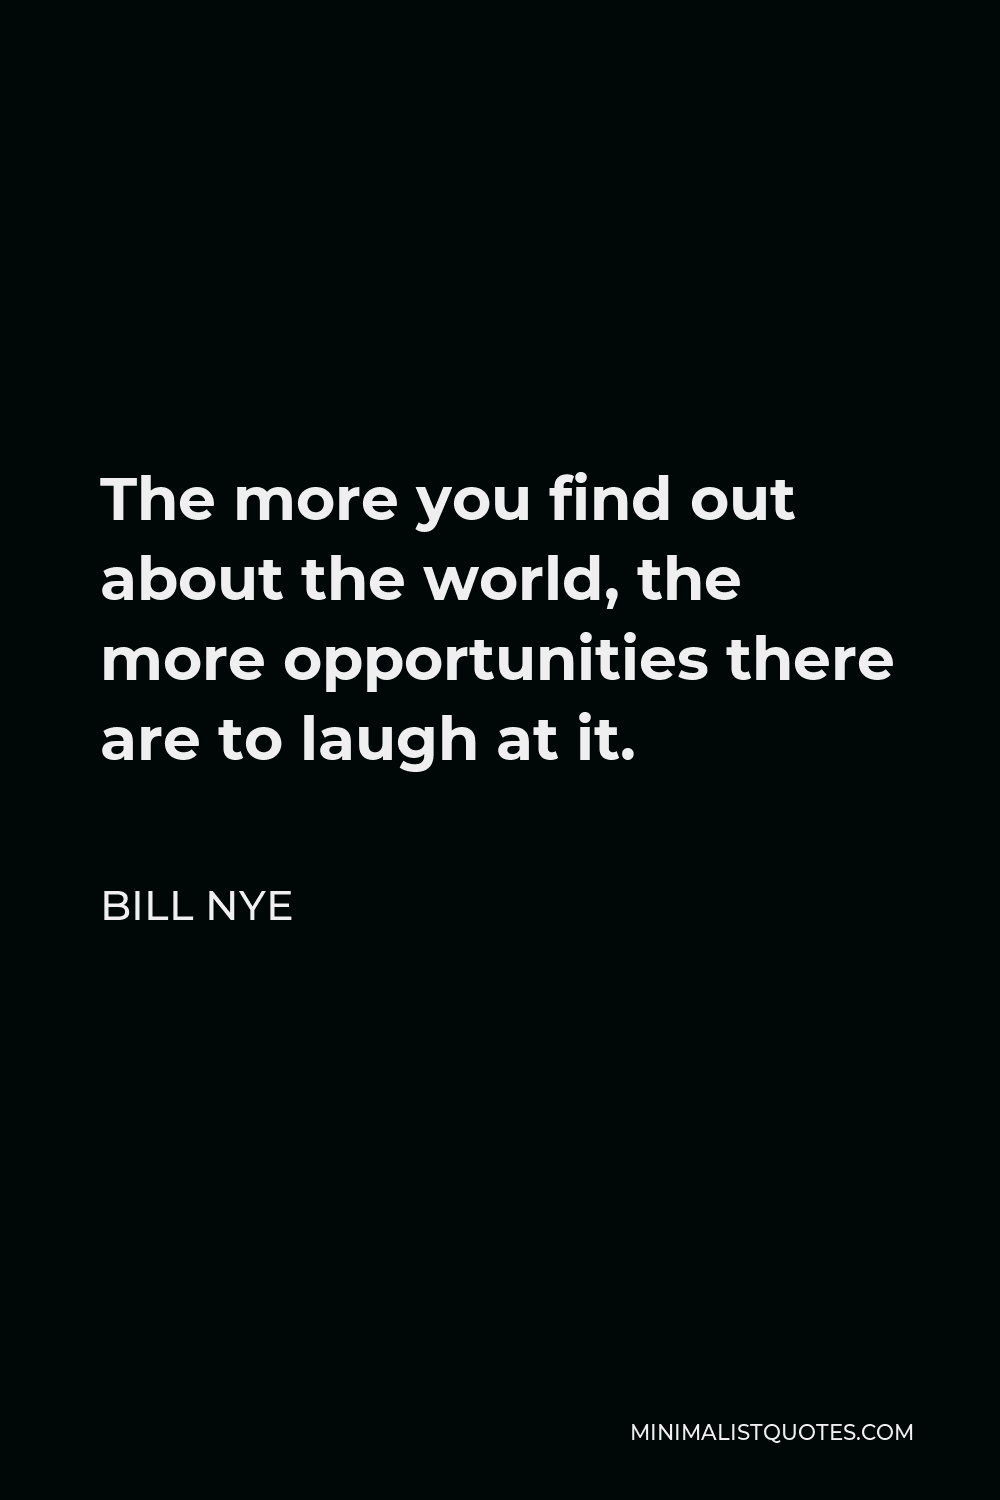 Bill Nye Quote - The more you find out about the world, the more opportunities there are to laugh at it.